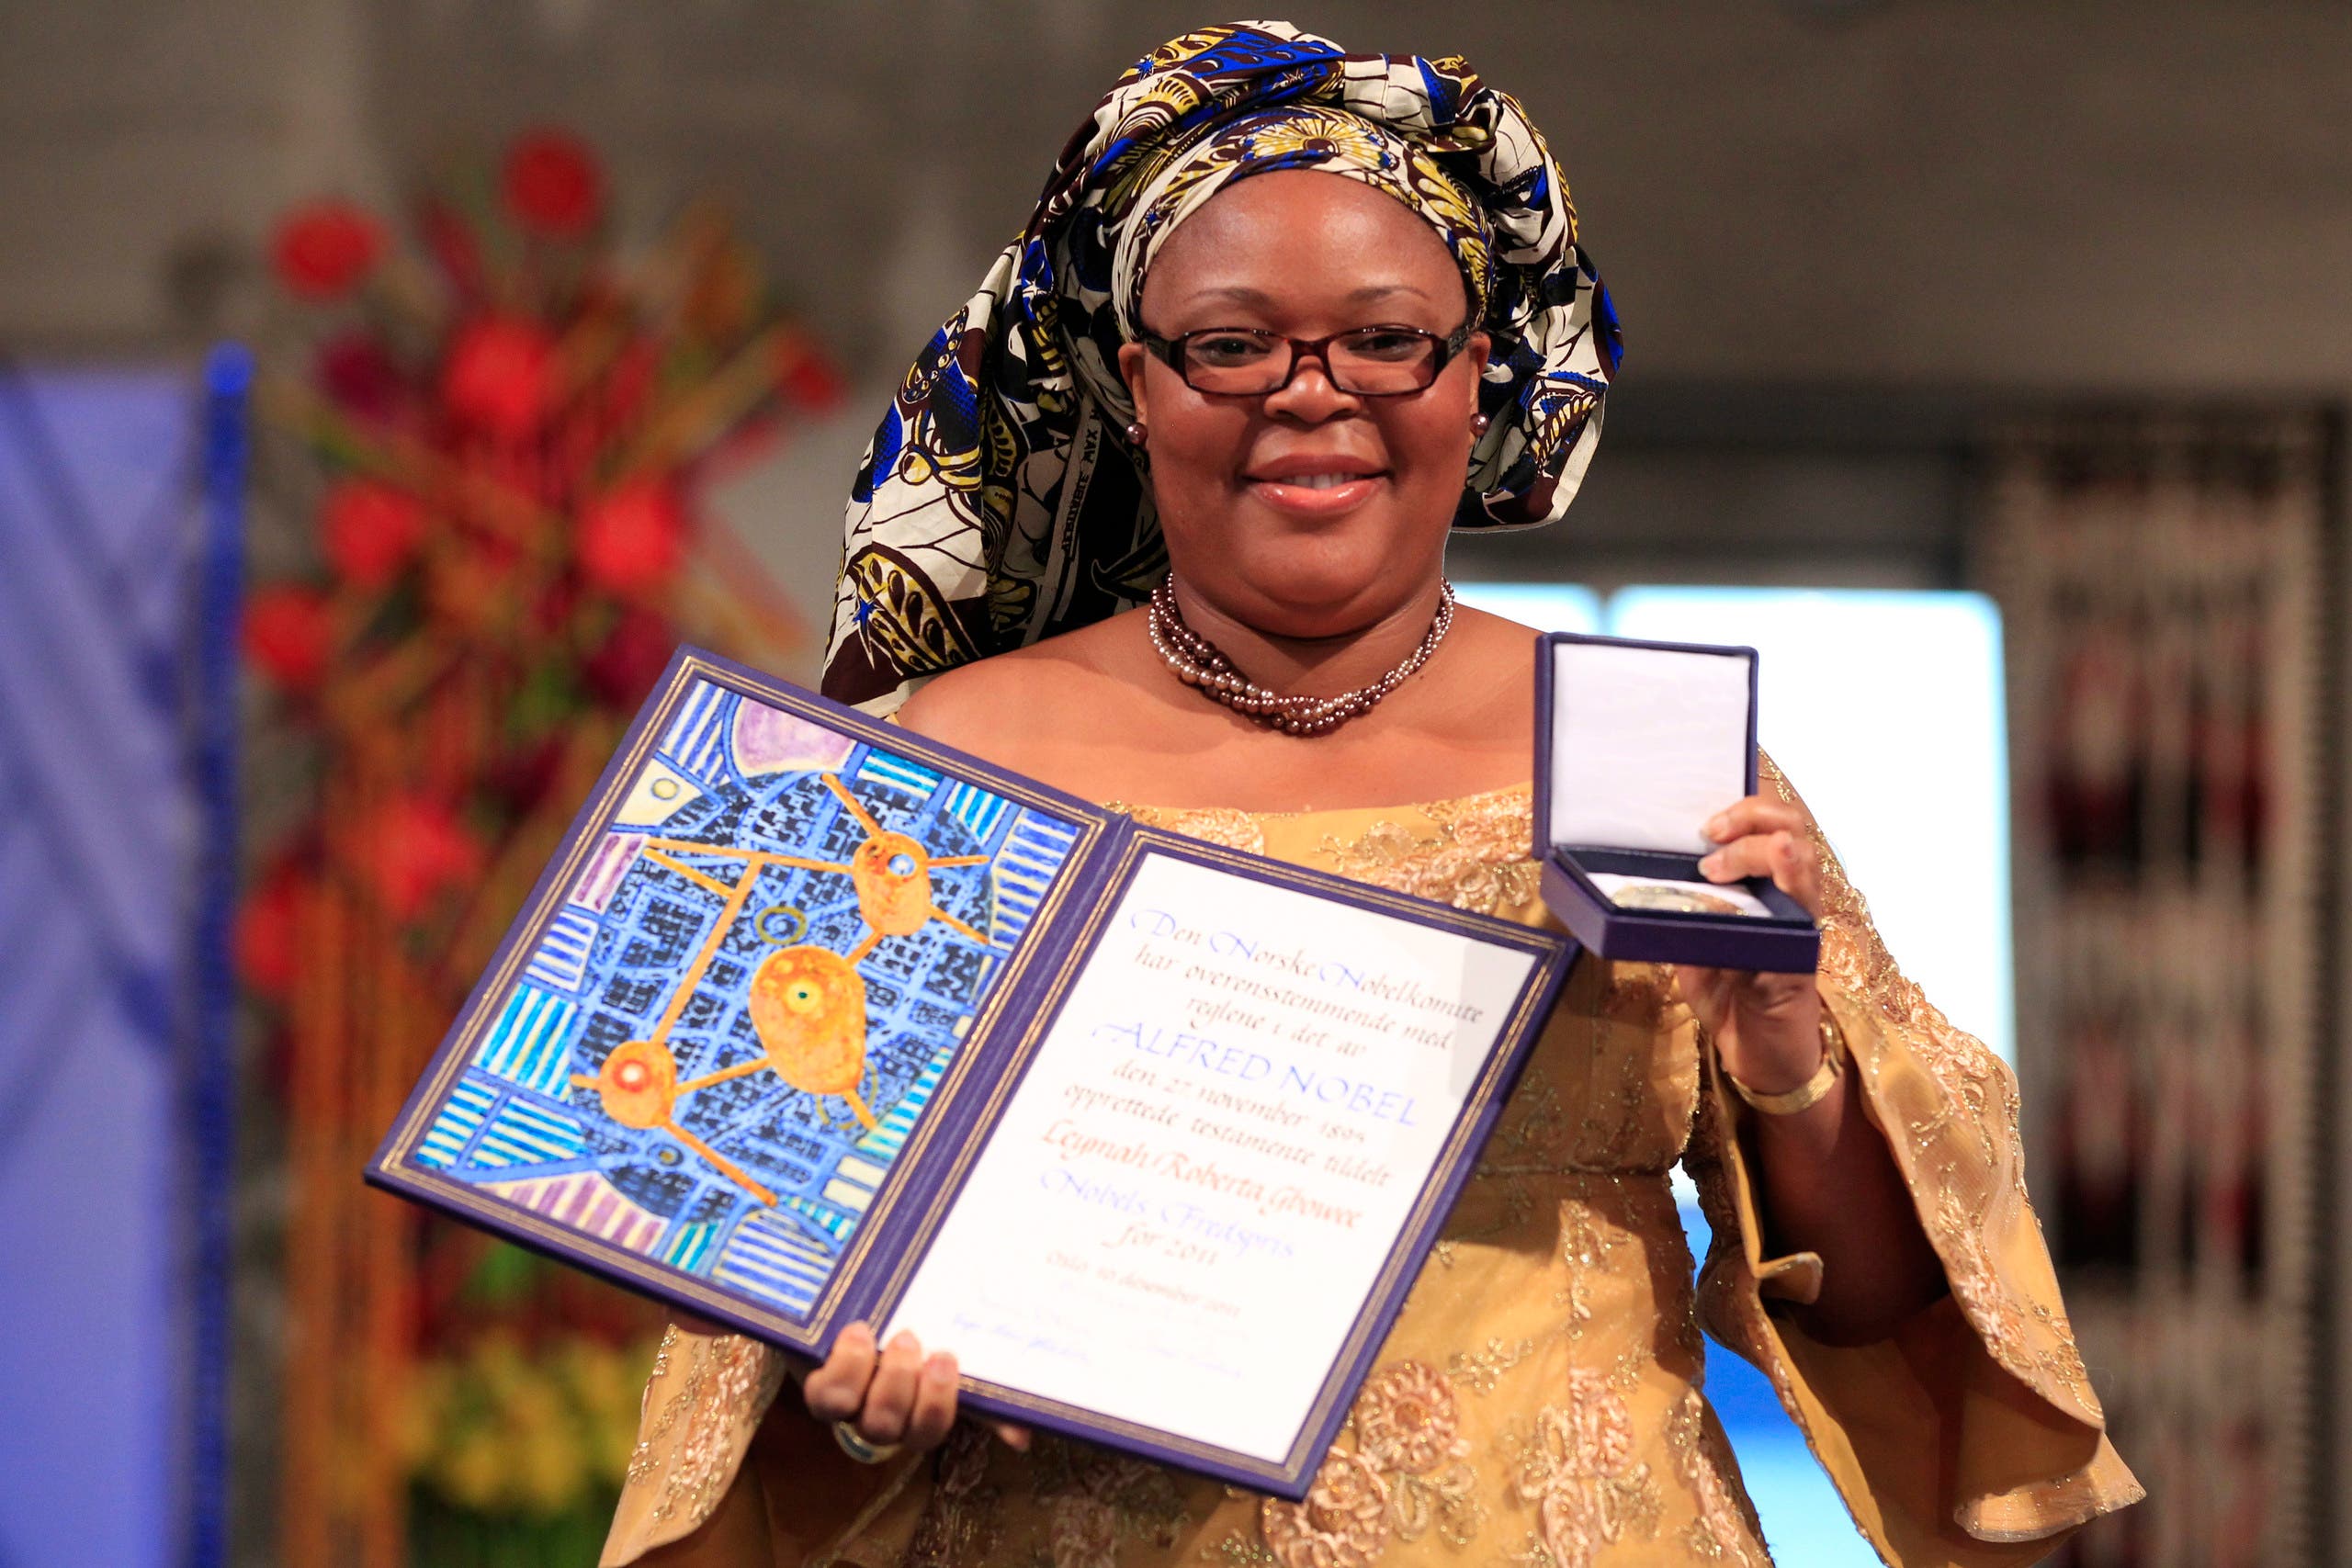 Nobel Peace Prize winner, Liberian peace activist Leymah Gbowee, poses with her award at the award ceremony in Oslo, December 10, 2011. (File photo: Reuters)